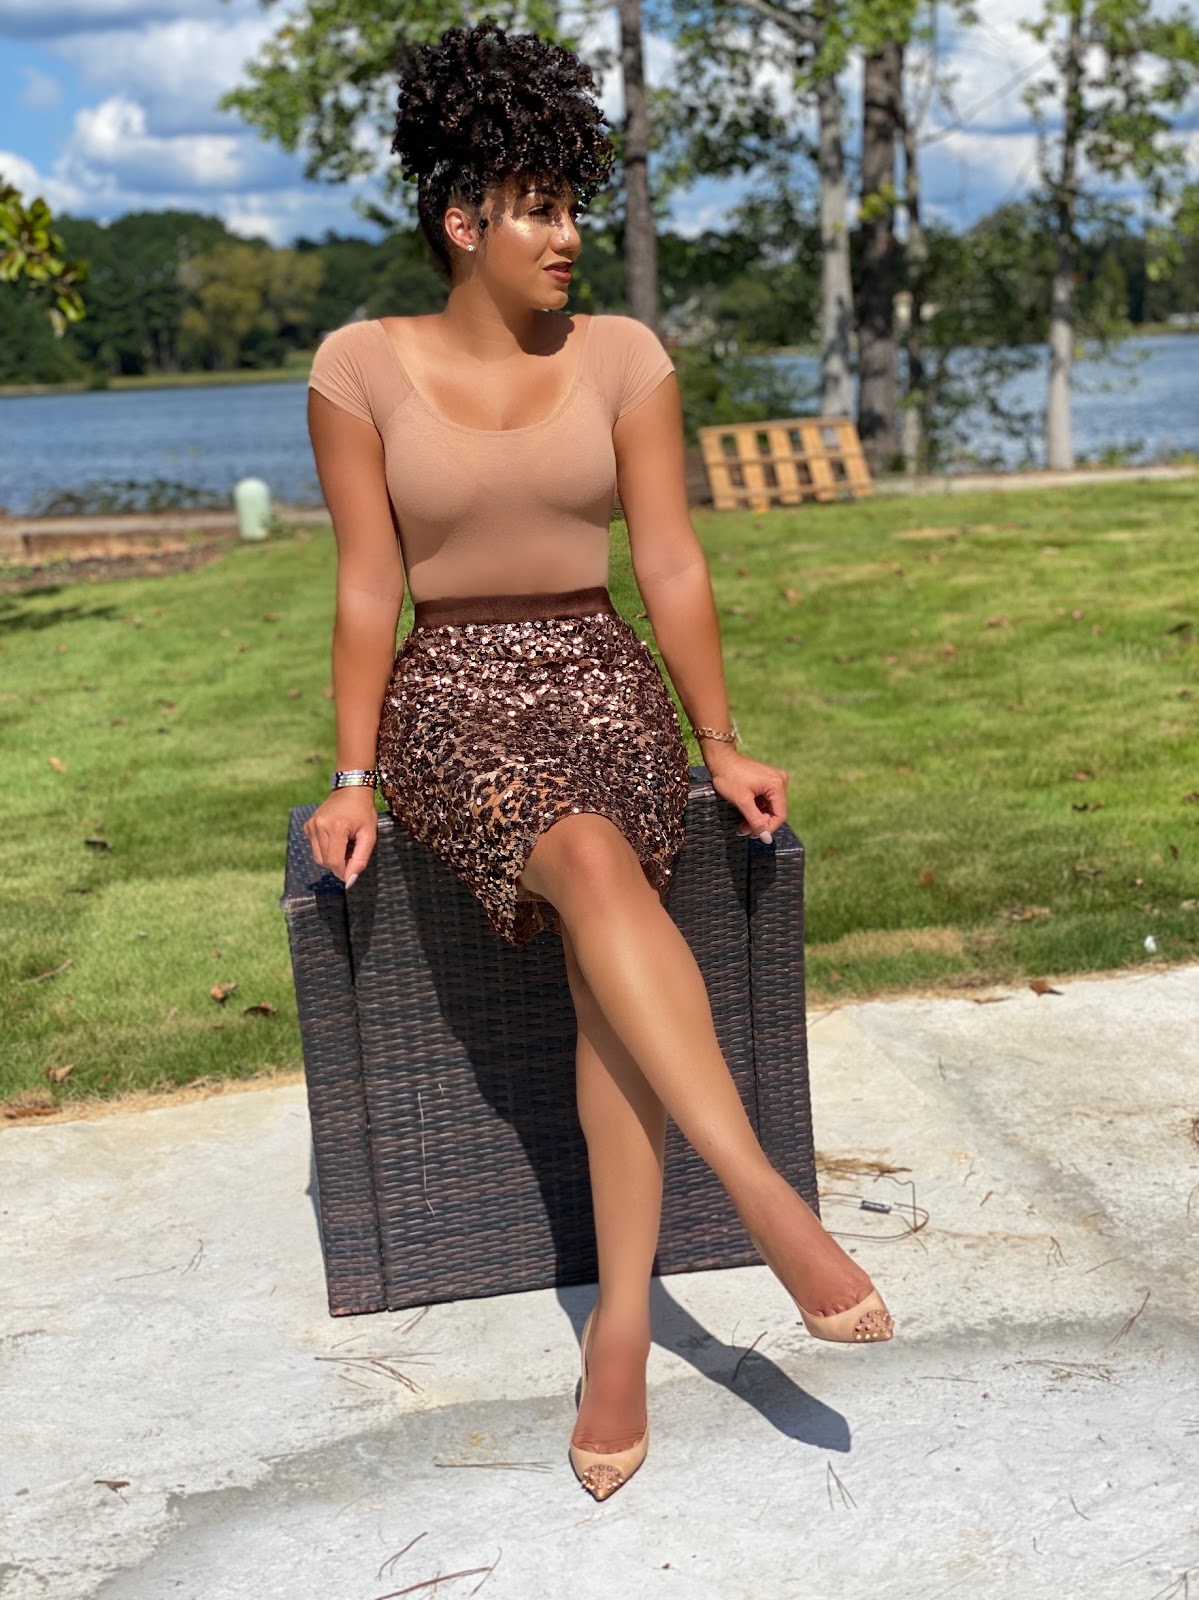 dr eva sitting on a chair in a grassy park with a tan shirt and sequins skirt